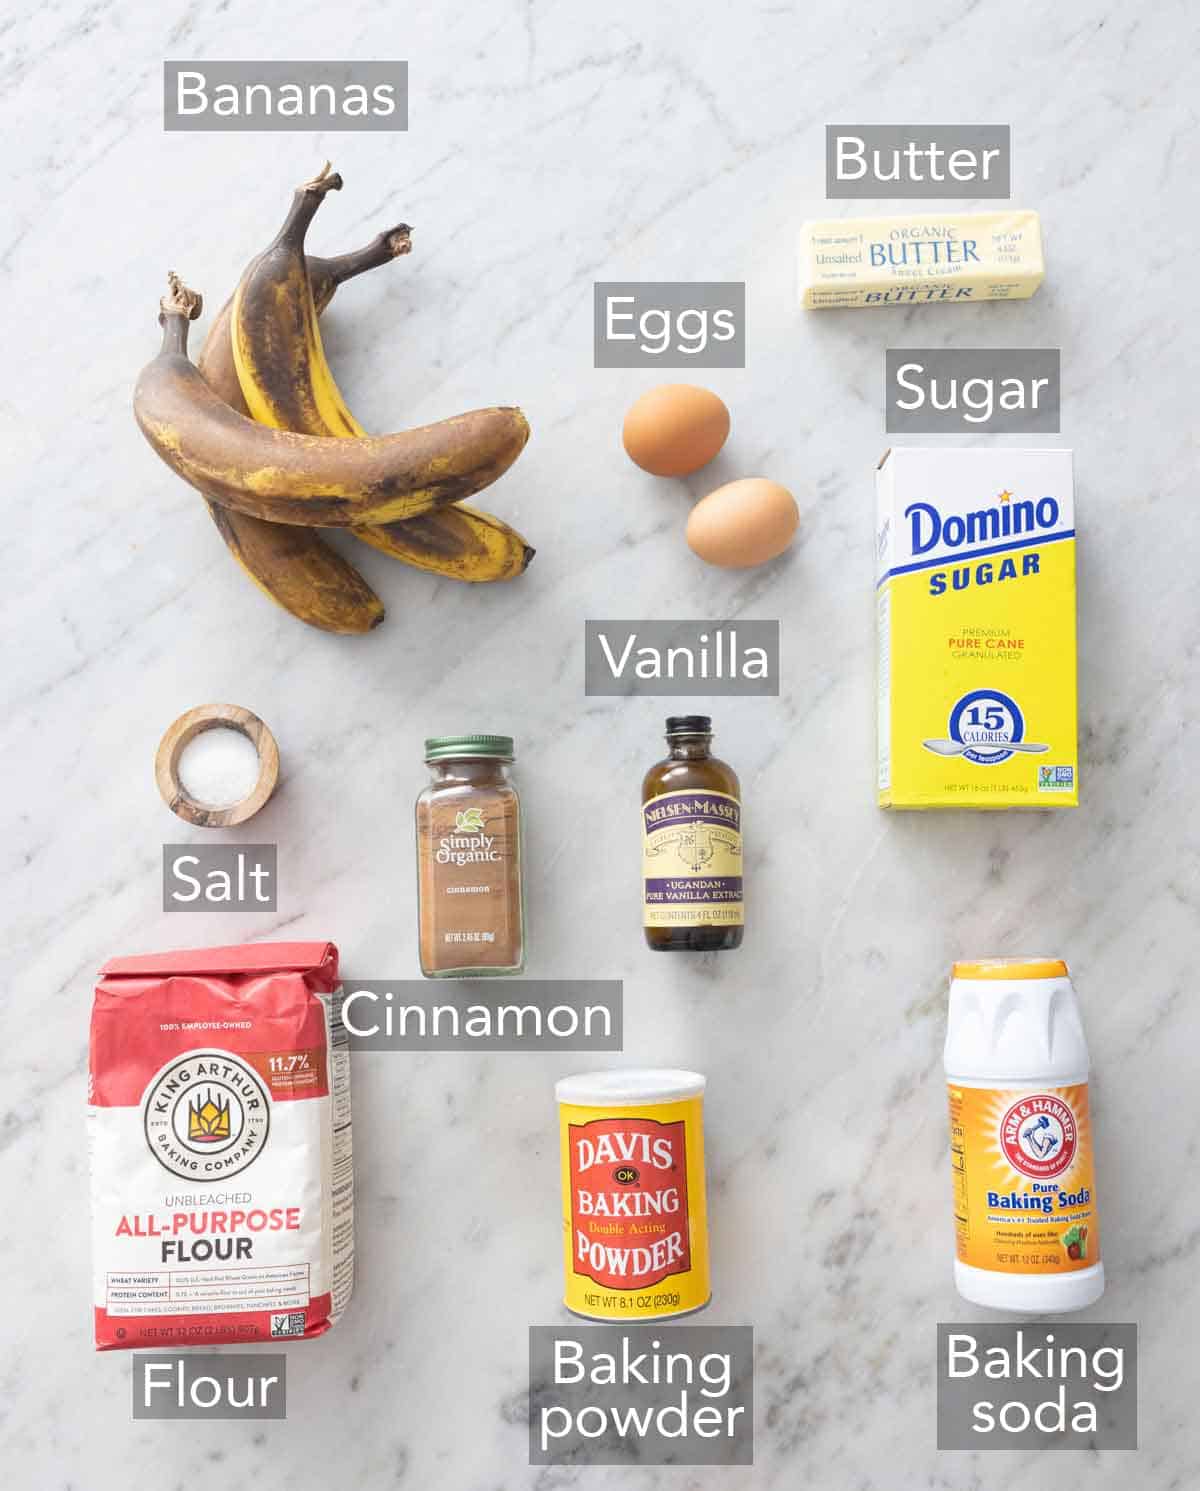 Ingredients needed for banana muffins.